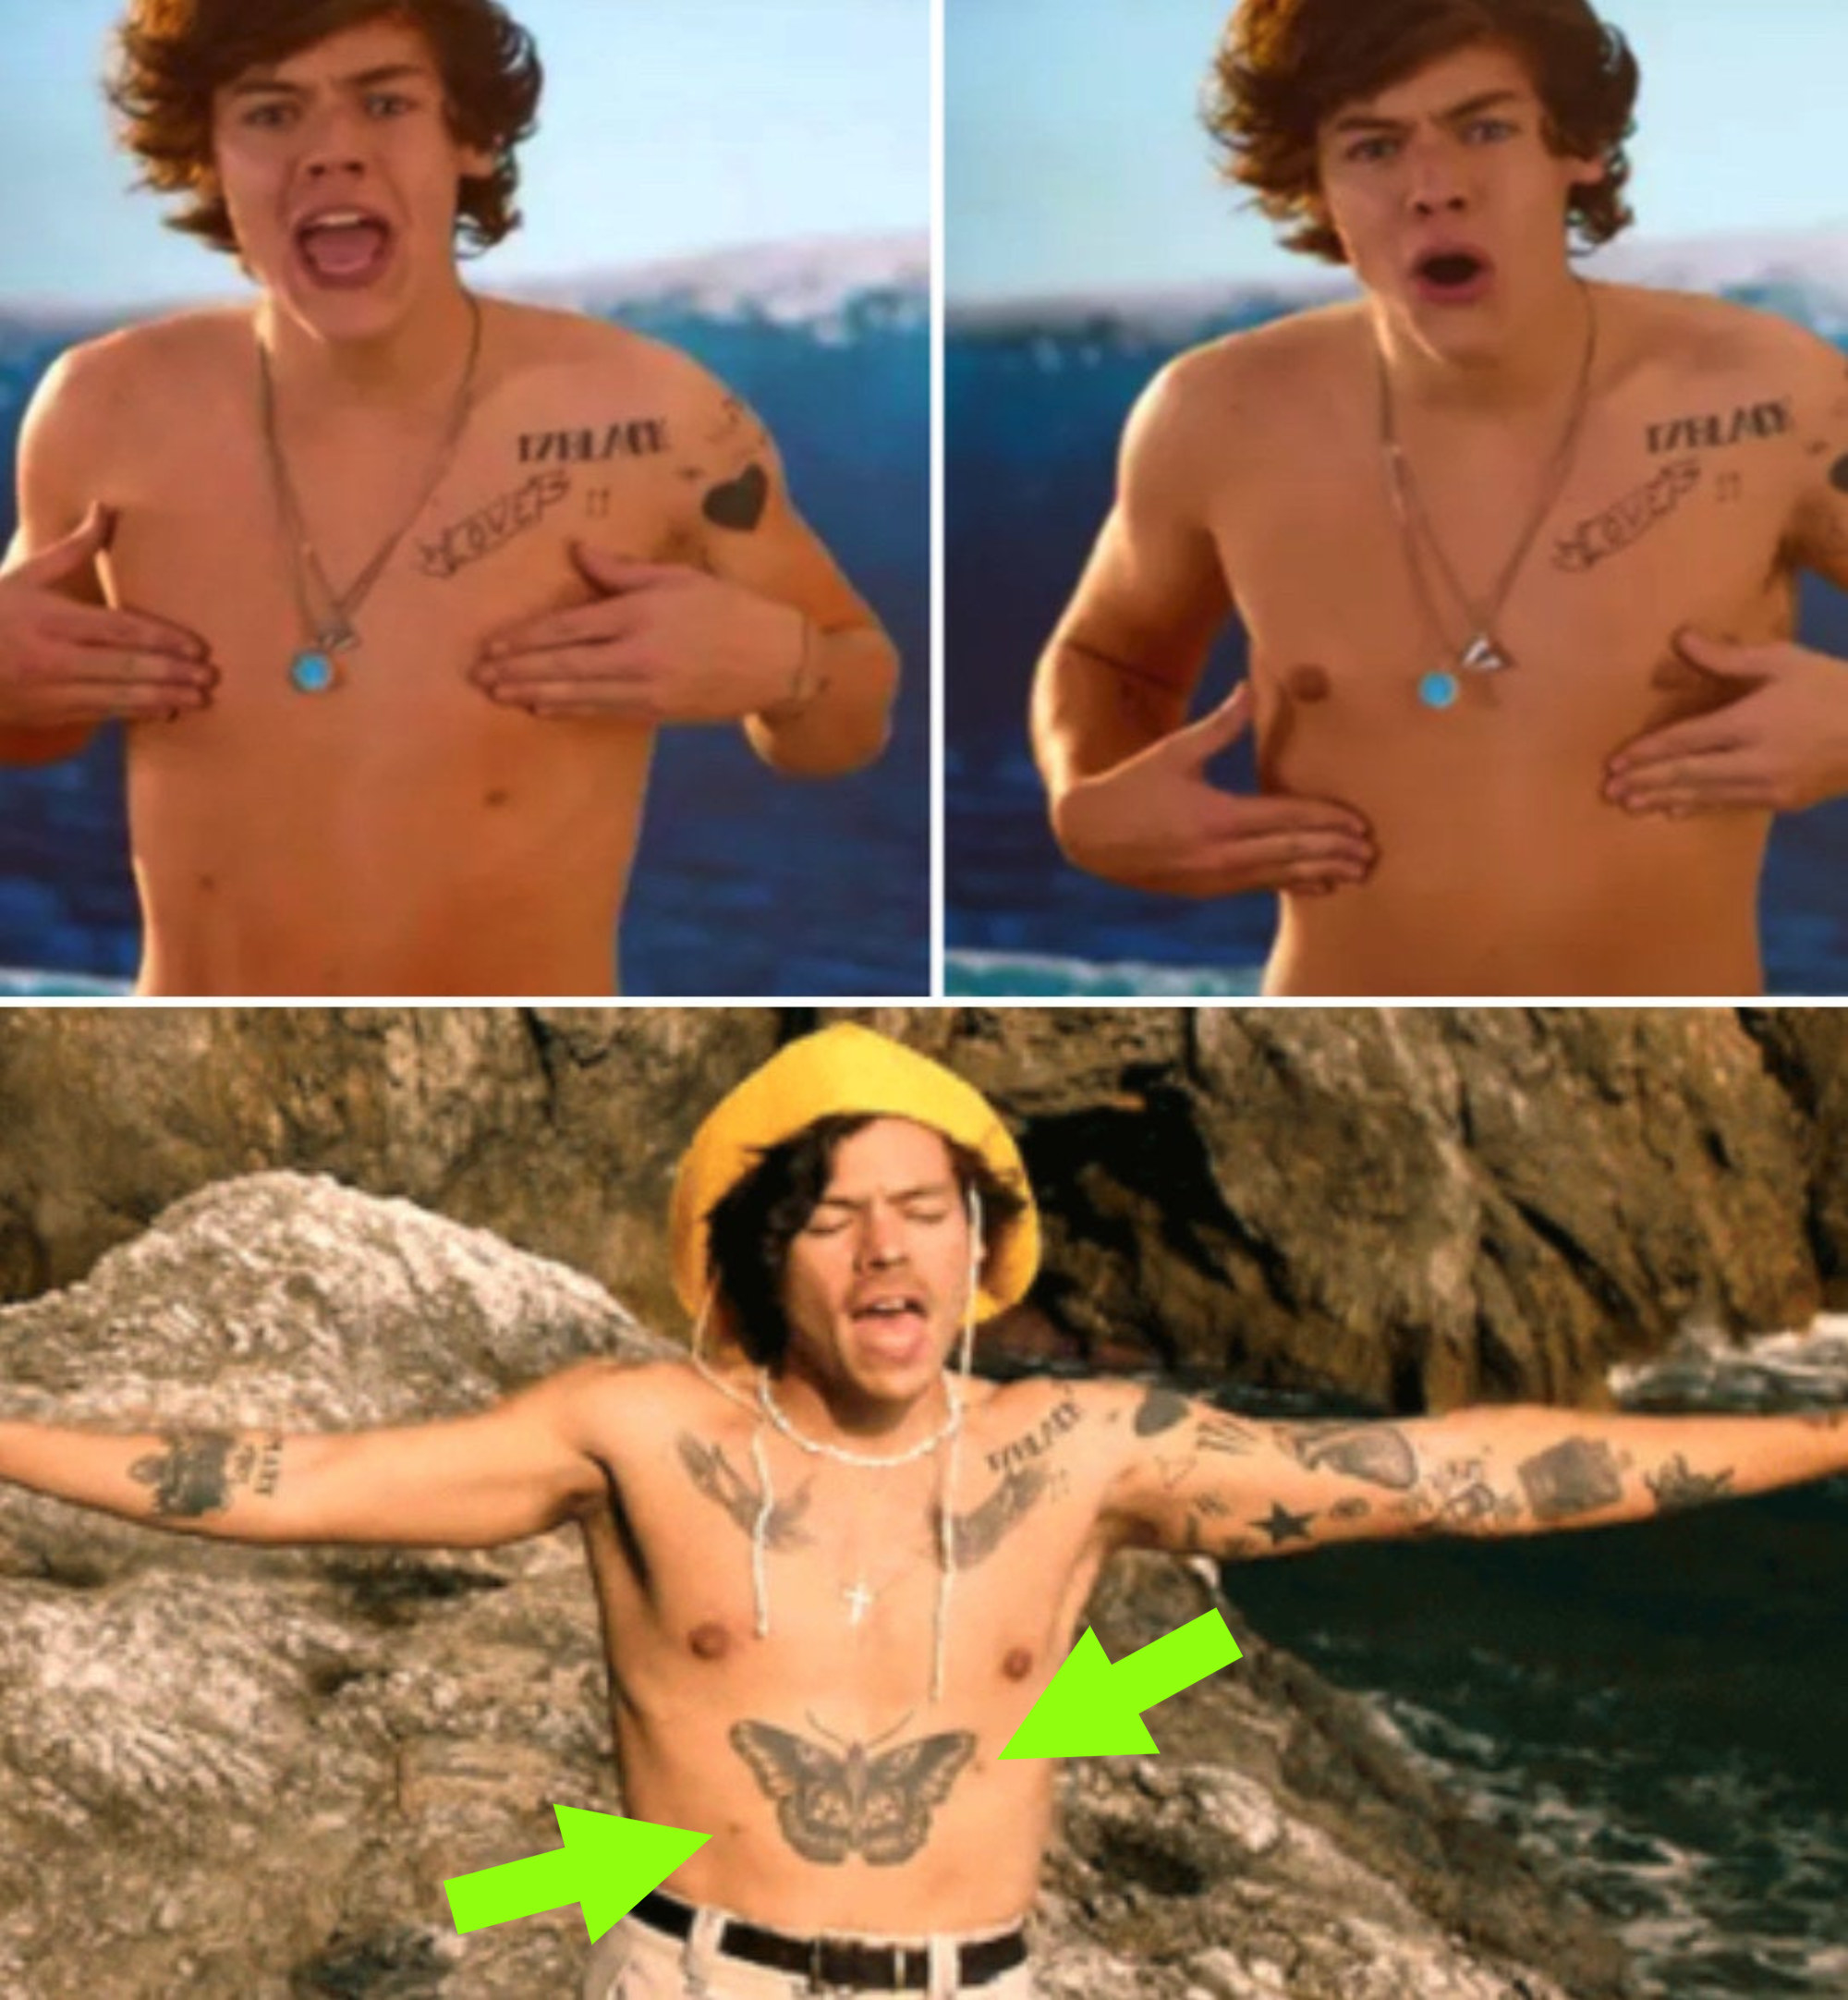 Harry Styles shirtless in the &quot;Kiss You&quot; music video for One Direction, covering his four nipples; Harry Styles wearing a fisherman&#x27;s hat while shirtless in the &quot;Golden&quot; music video